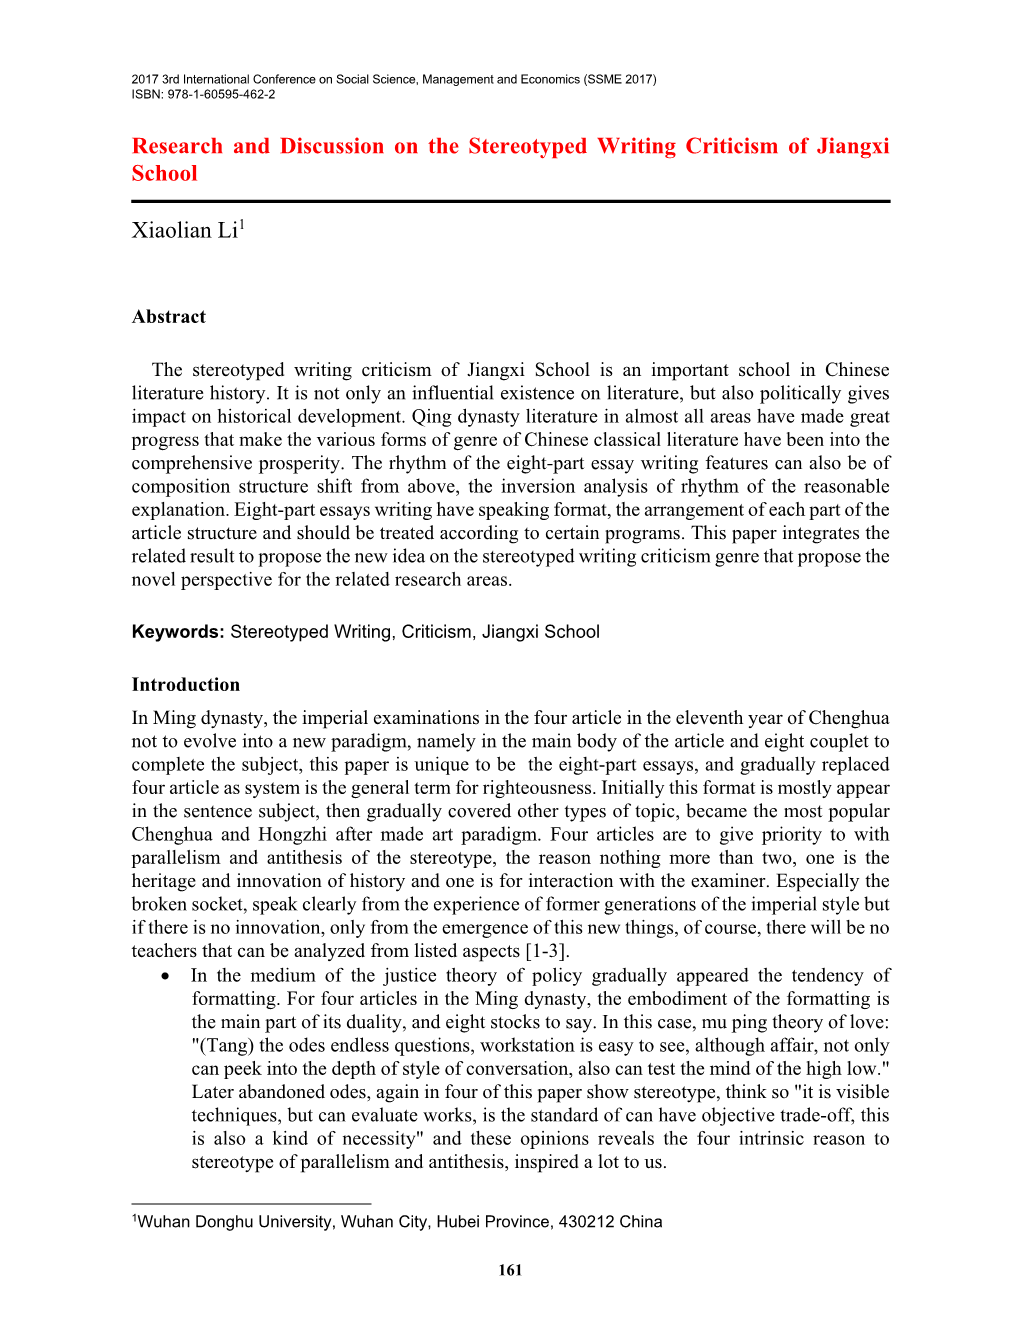 Research and Discussion on the Stereotyped Writing Criticism of Jiangxi School